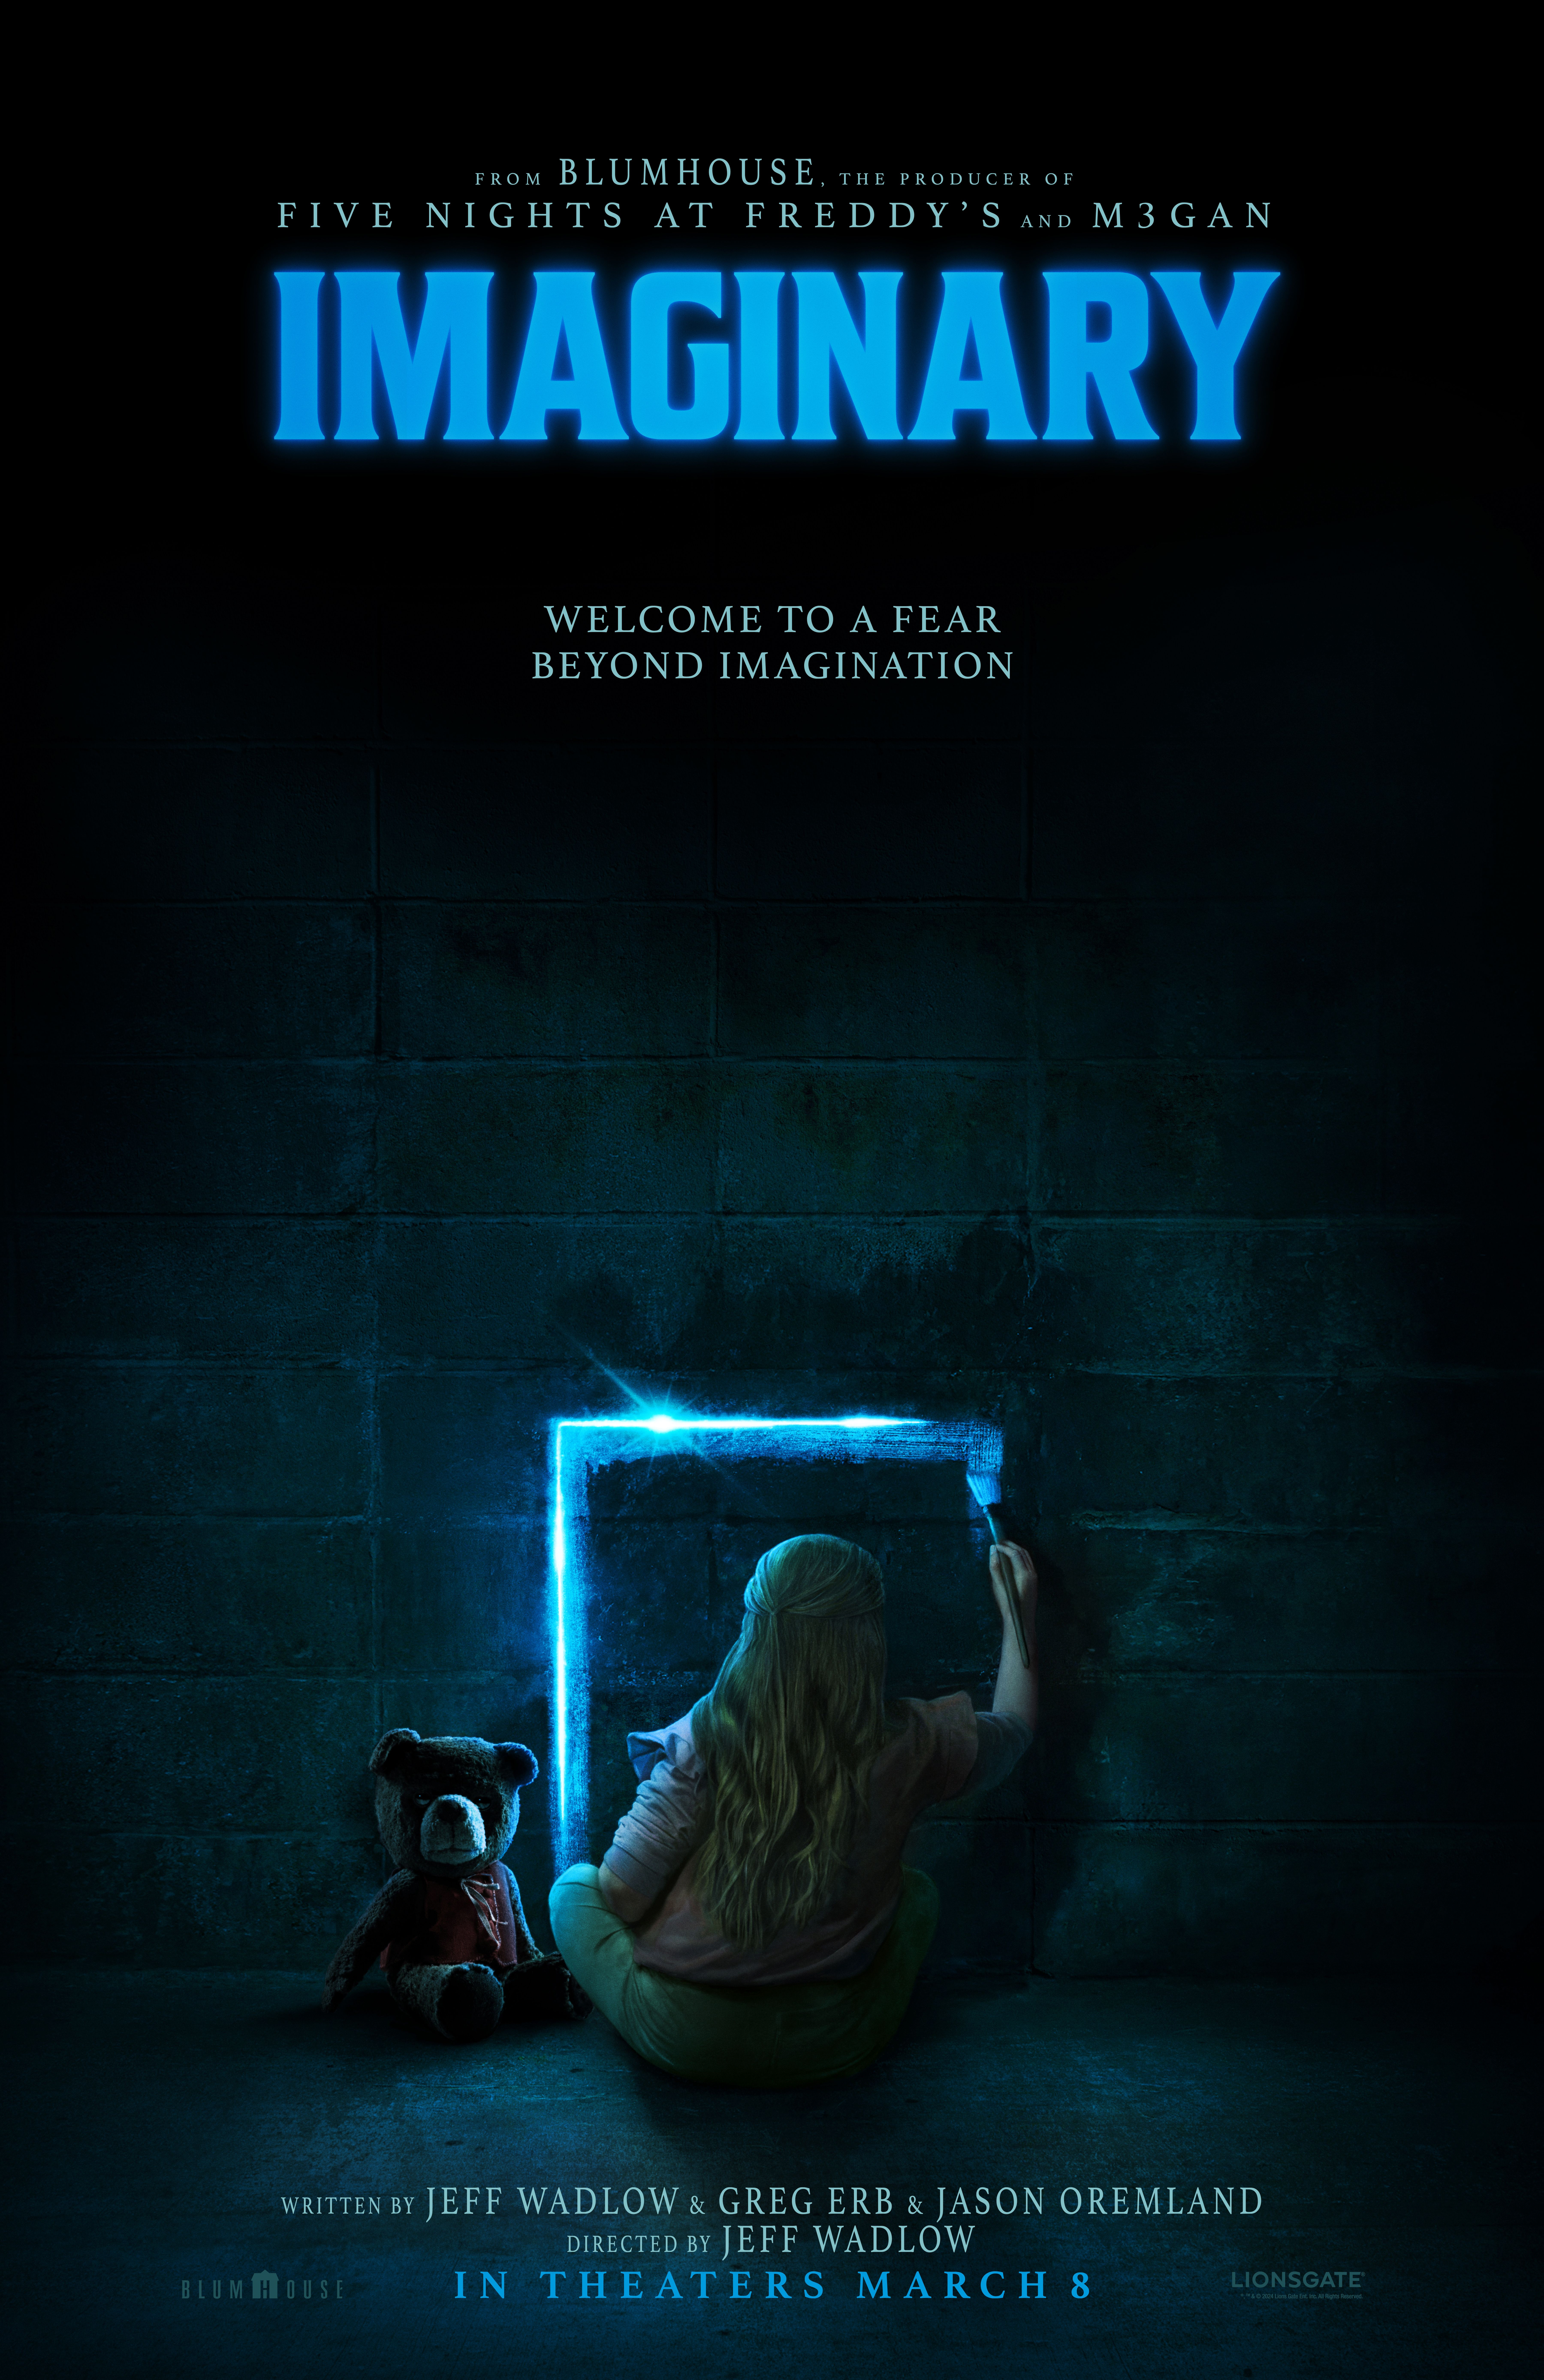 Blumhouse’s Upcoming Horror Movie Imaginary Drops Spooky New Poster